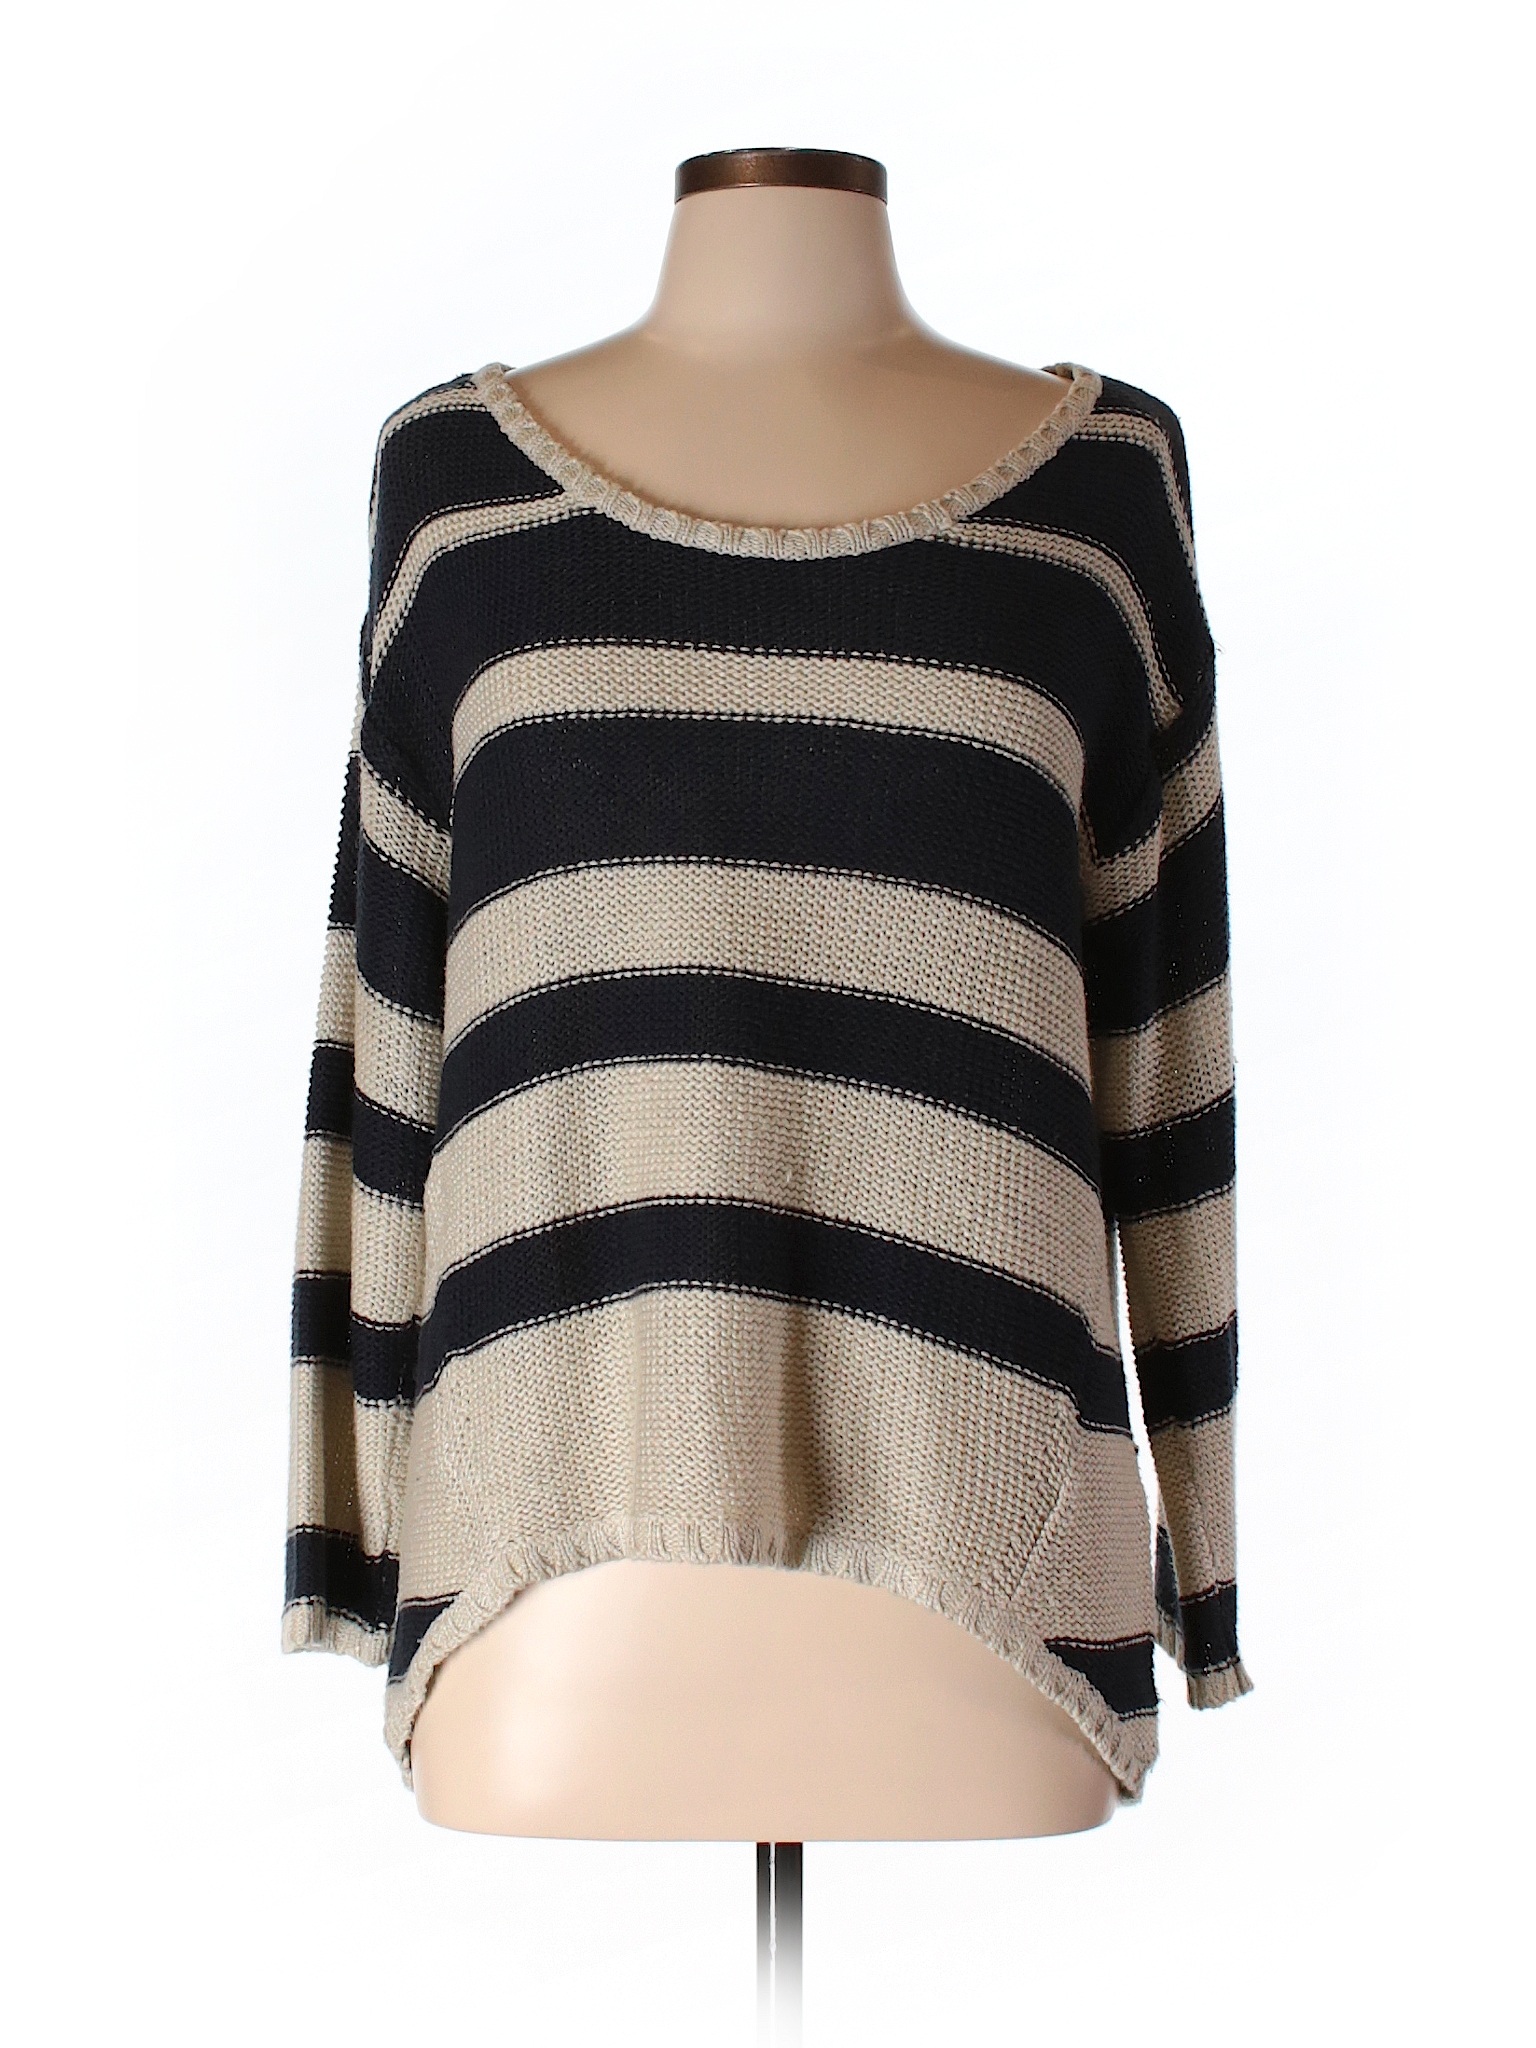 Quinn Pullover Sweater - 77% off only on thredUP